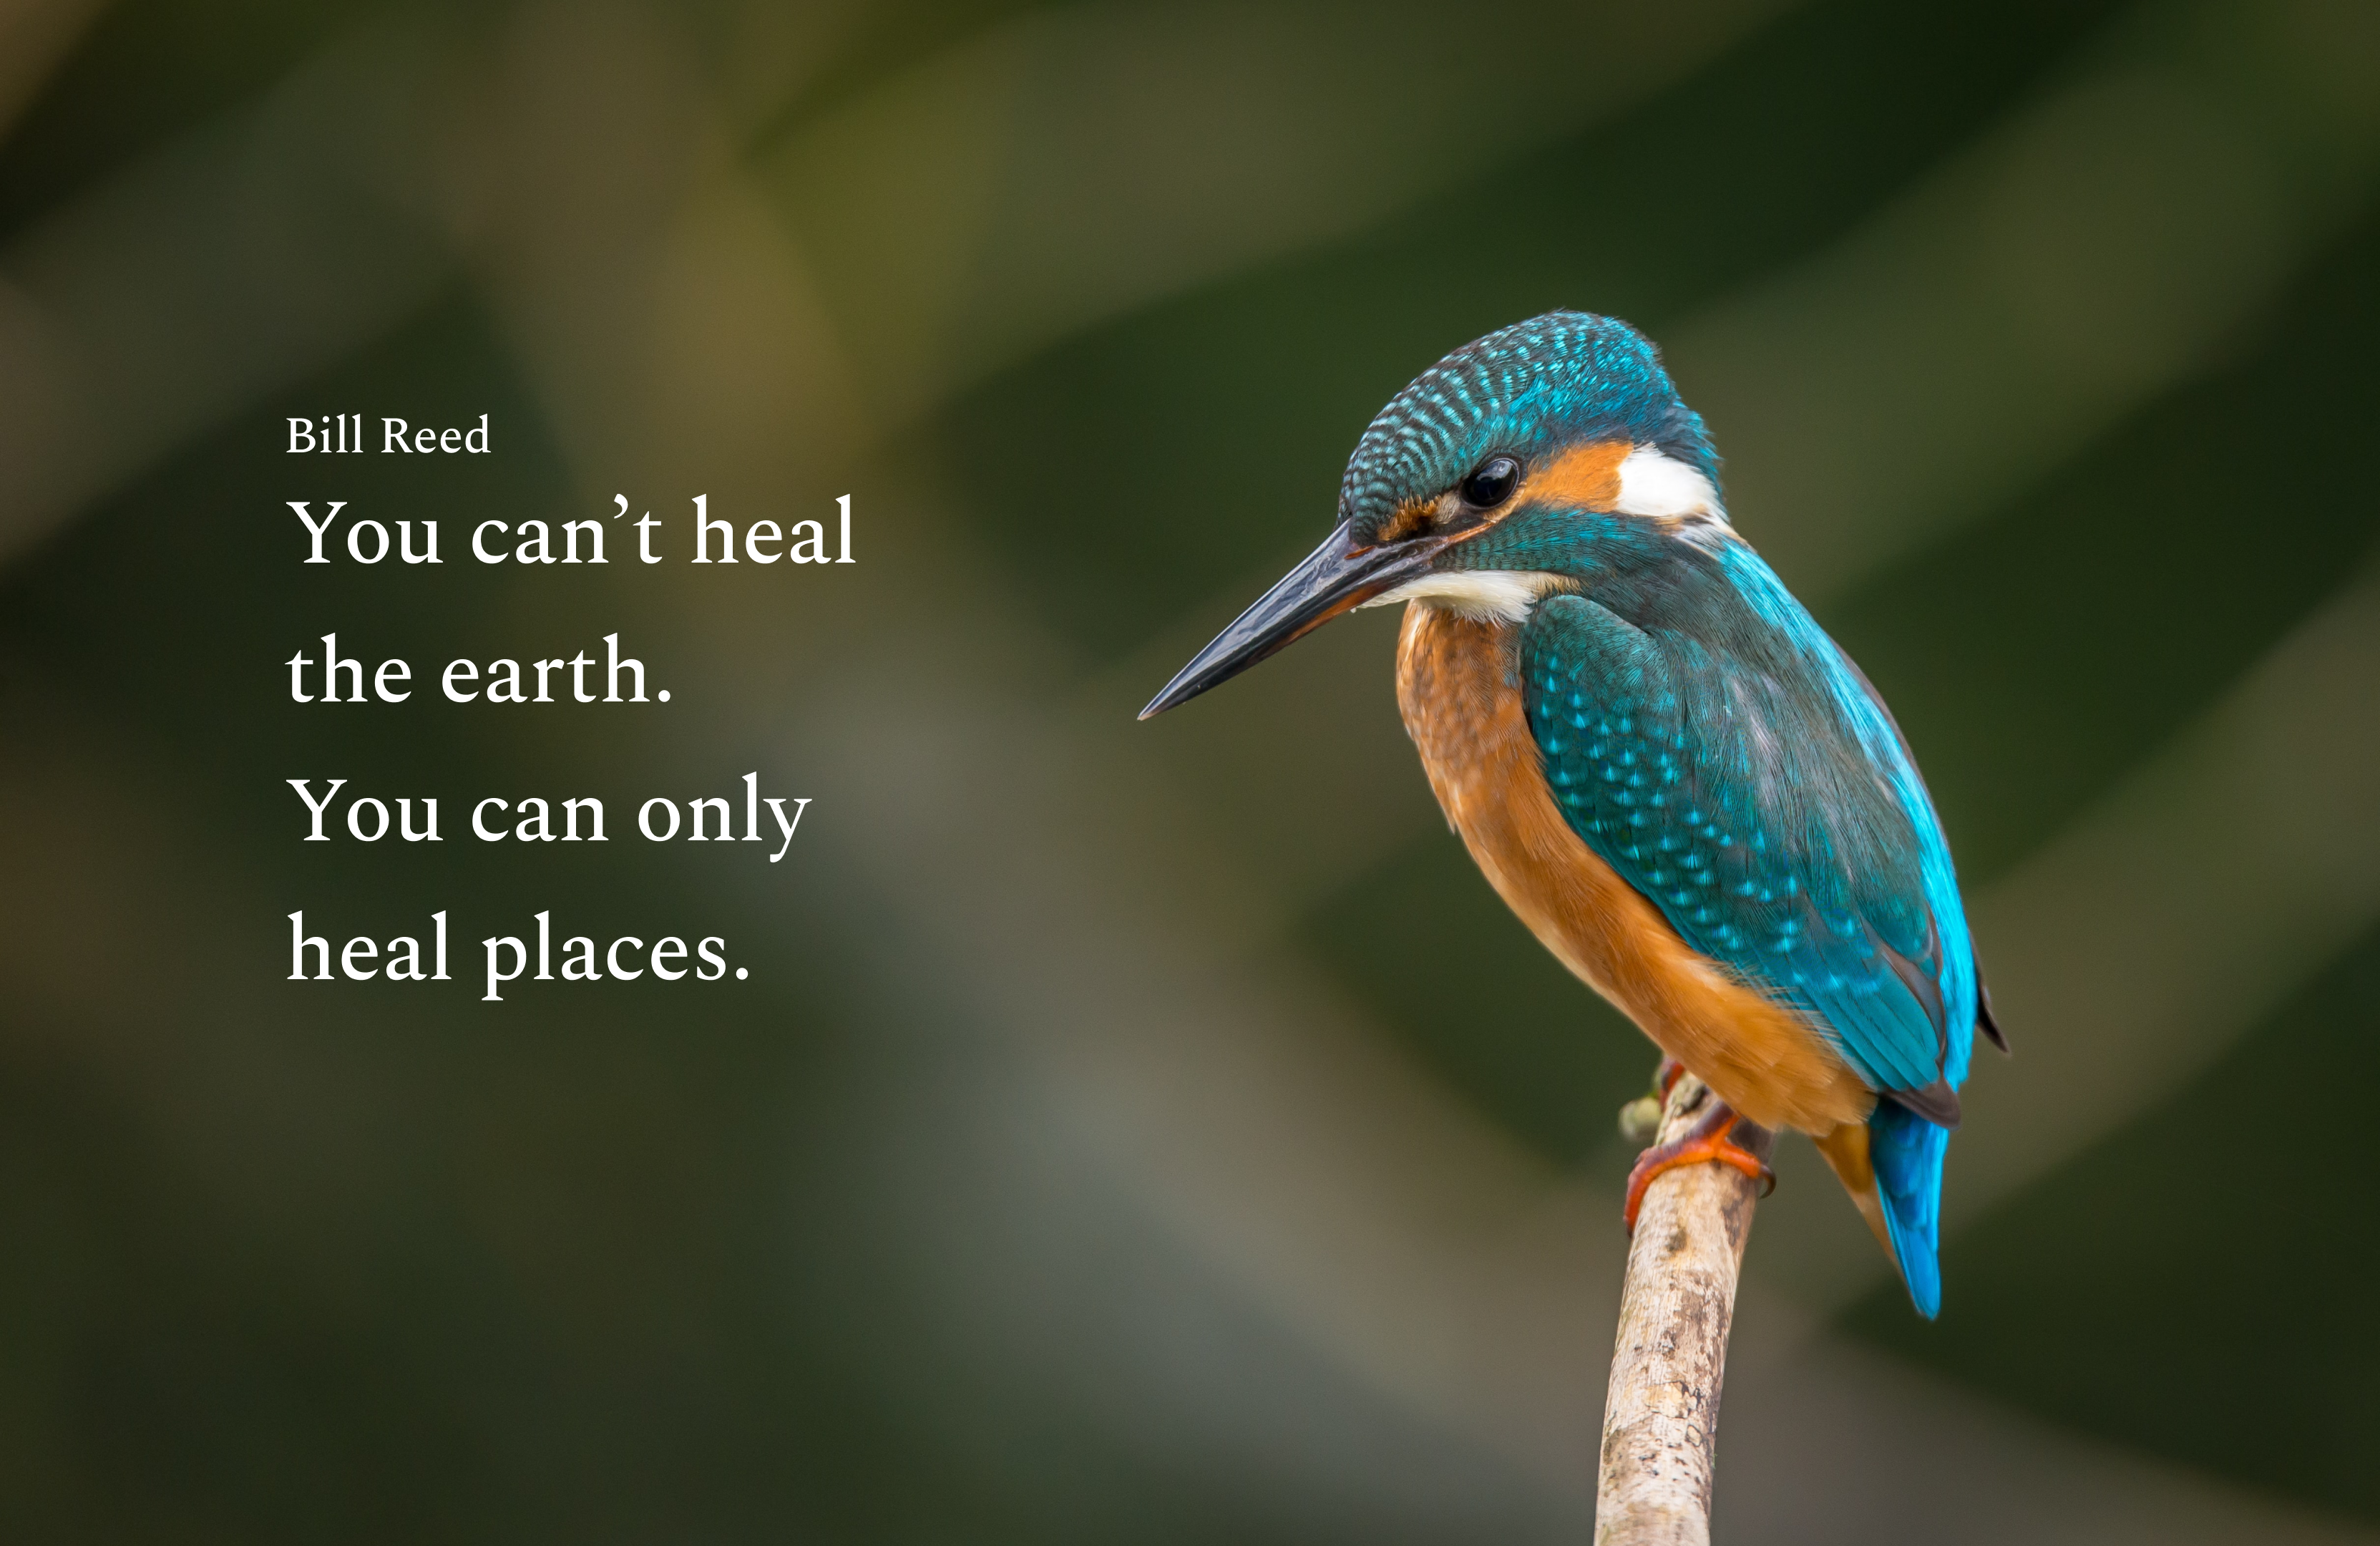 You can’t heal the earth. You can only heal places.